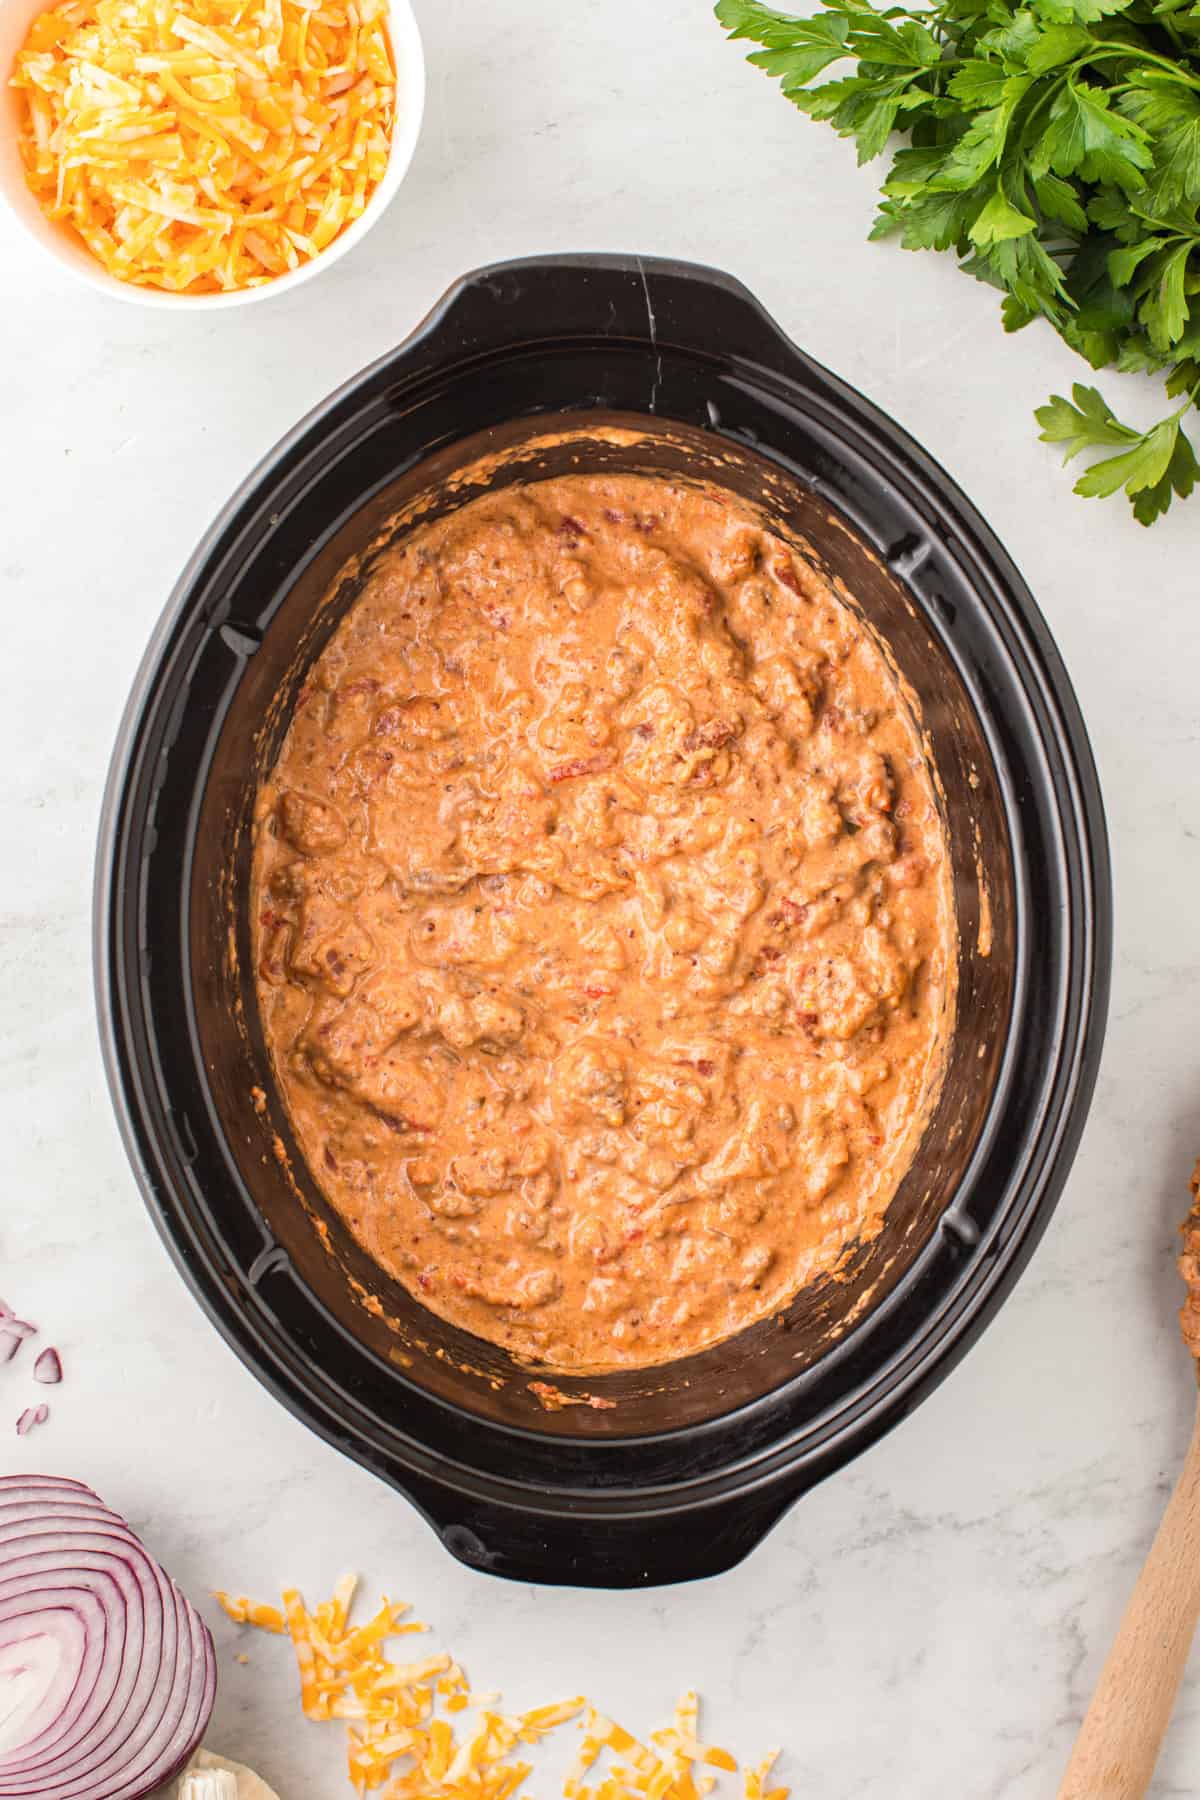 The cheesy burger dip after cooking and combining in the crockpot.